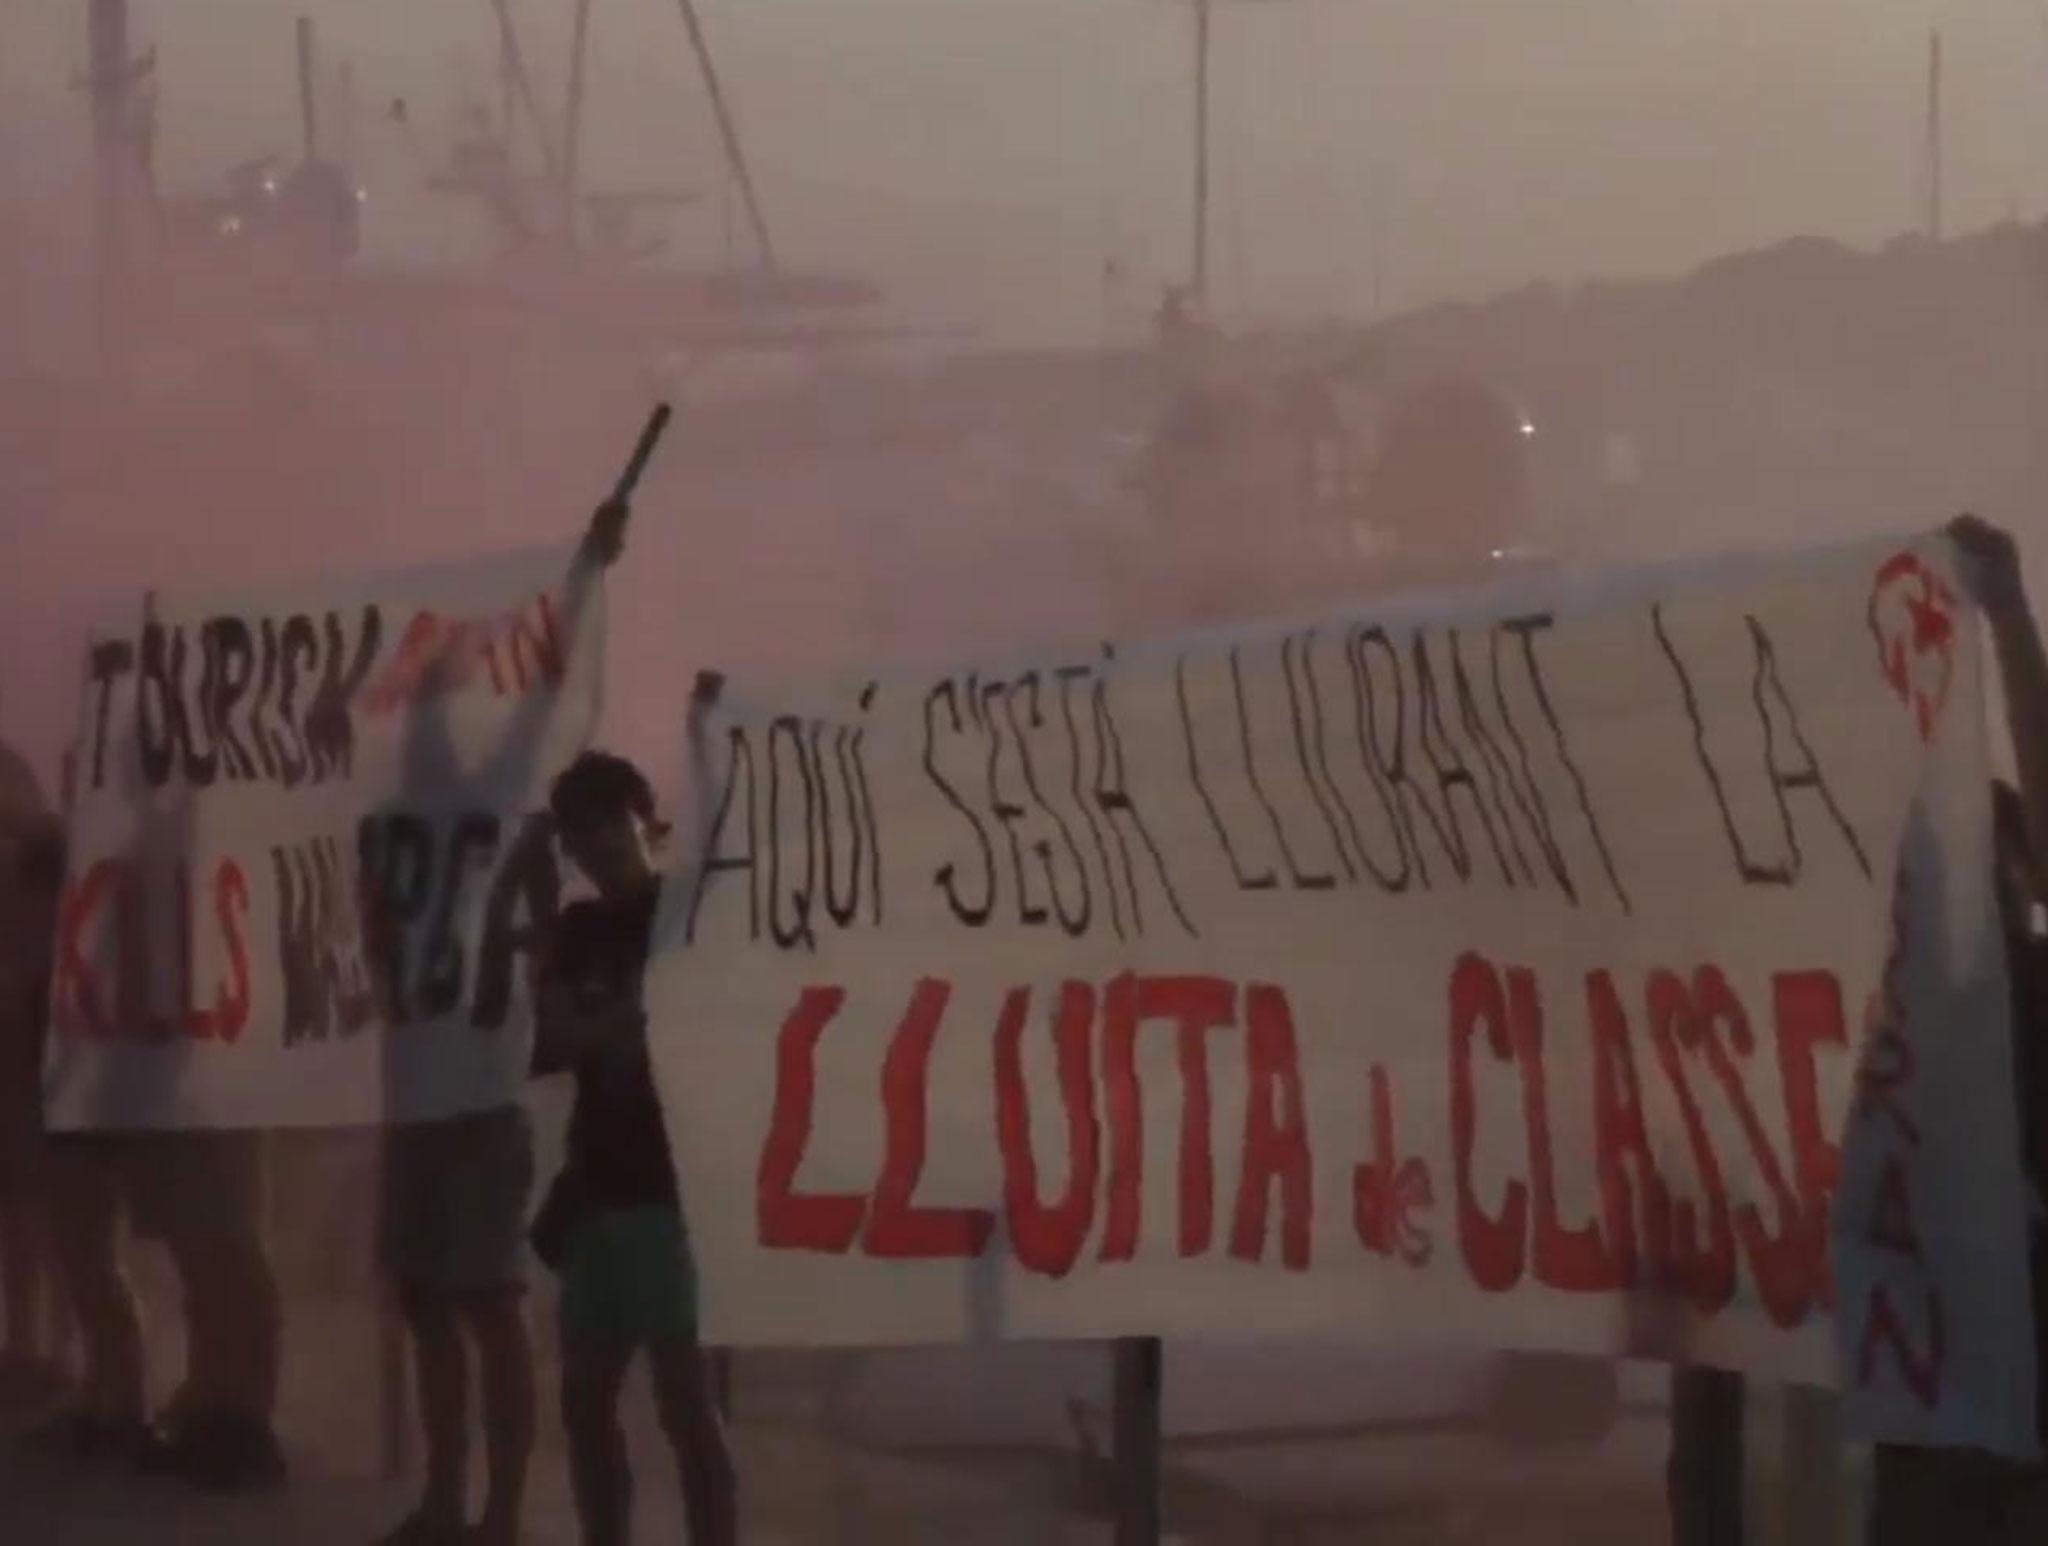 Members of Spain's Arran anarchist group protesting in Palma de Mallorca